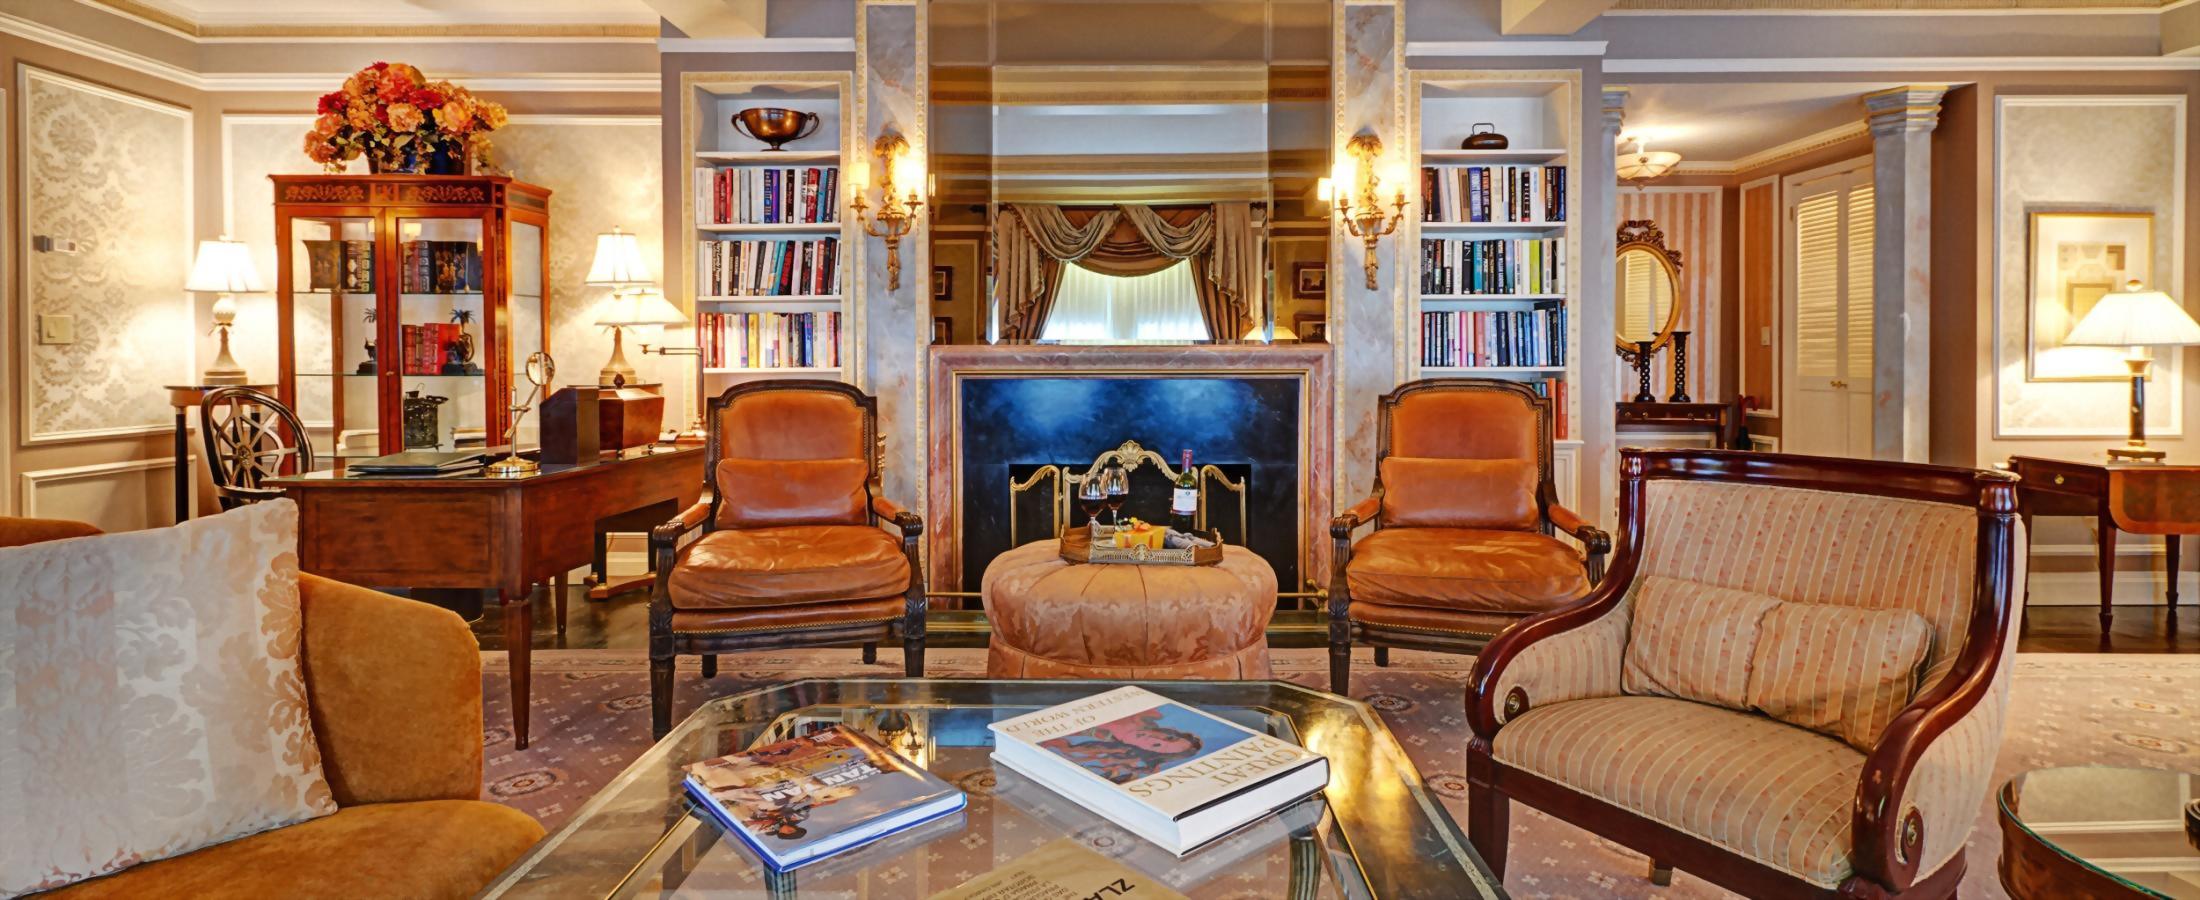 The living room of the Vaclav Havel Suite at the Hotel Elysée has a beautiful non-working fireplace.